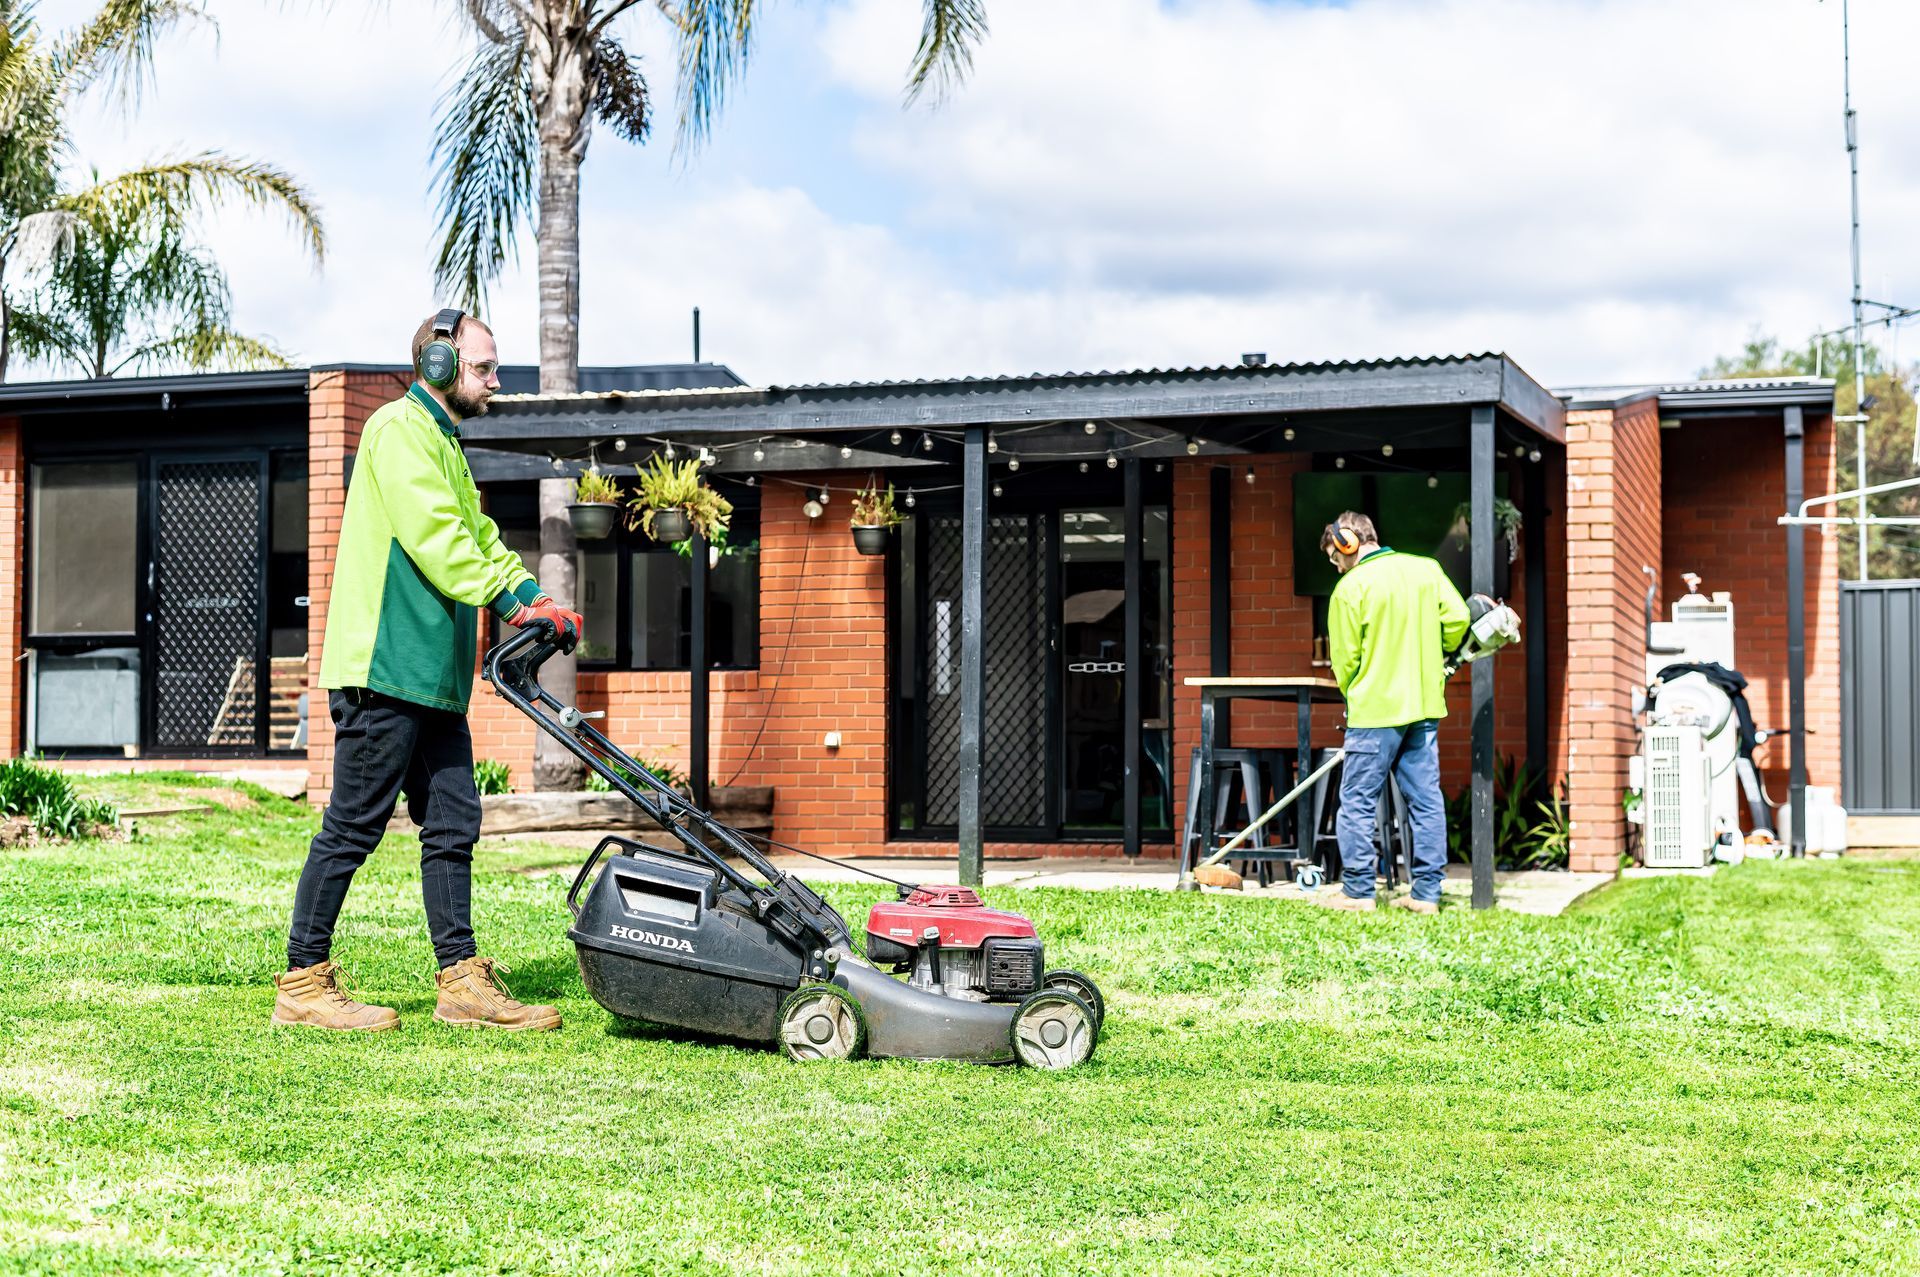 A Man Is Using A Lawn Mower To Cut The Grass In Front Of A House — 2easy Cleaning in Bendigo, VIC